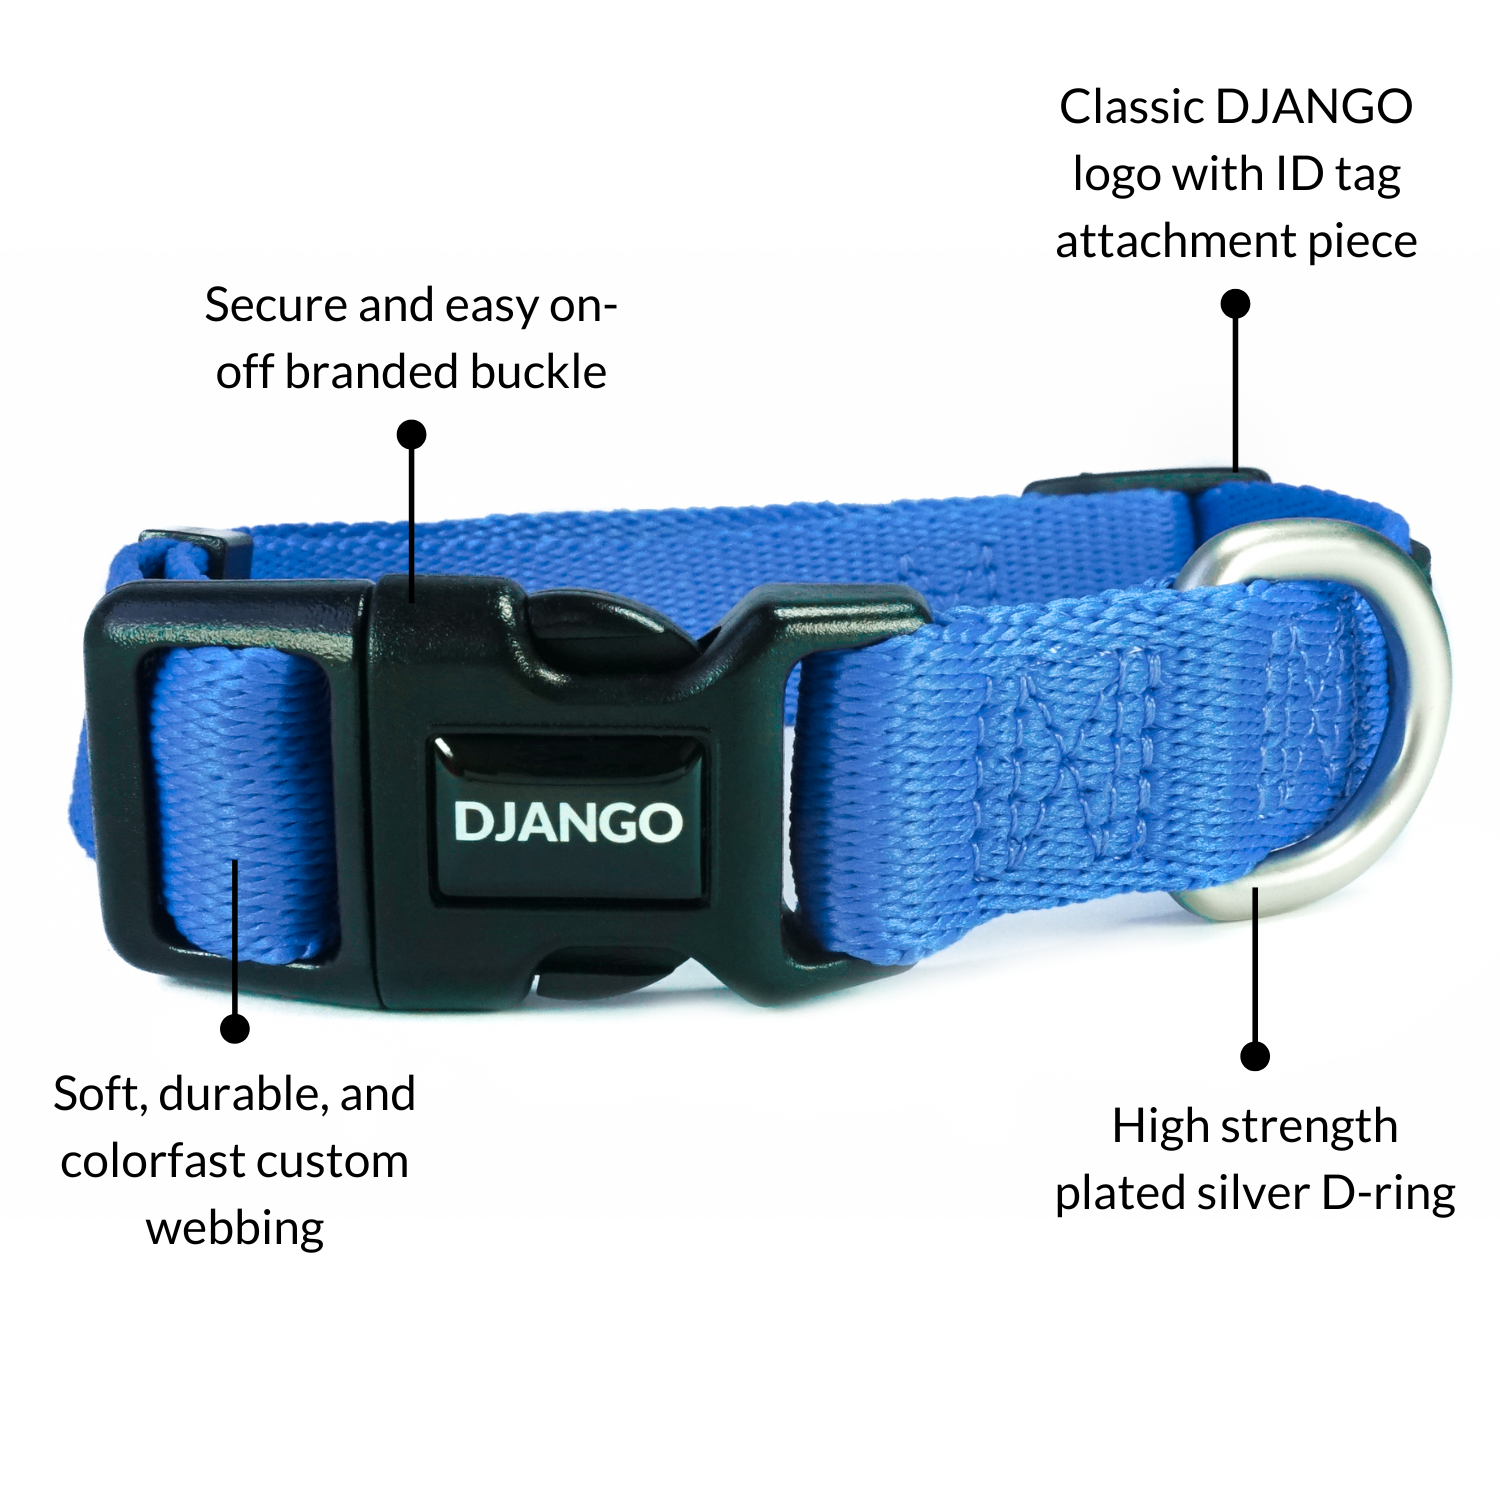 DJANGO Tahoe Dog Collar in Alpine Blue - Key features include soft and durable custom webbing, a heavy duty plated silver D-ring, a secure and easy on-off side release buckle, and DJANGO's classic logo. - djangobrand.com